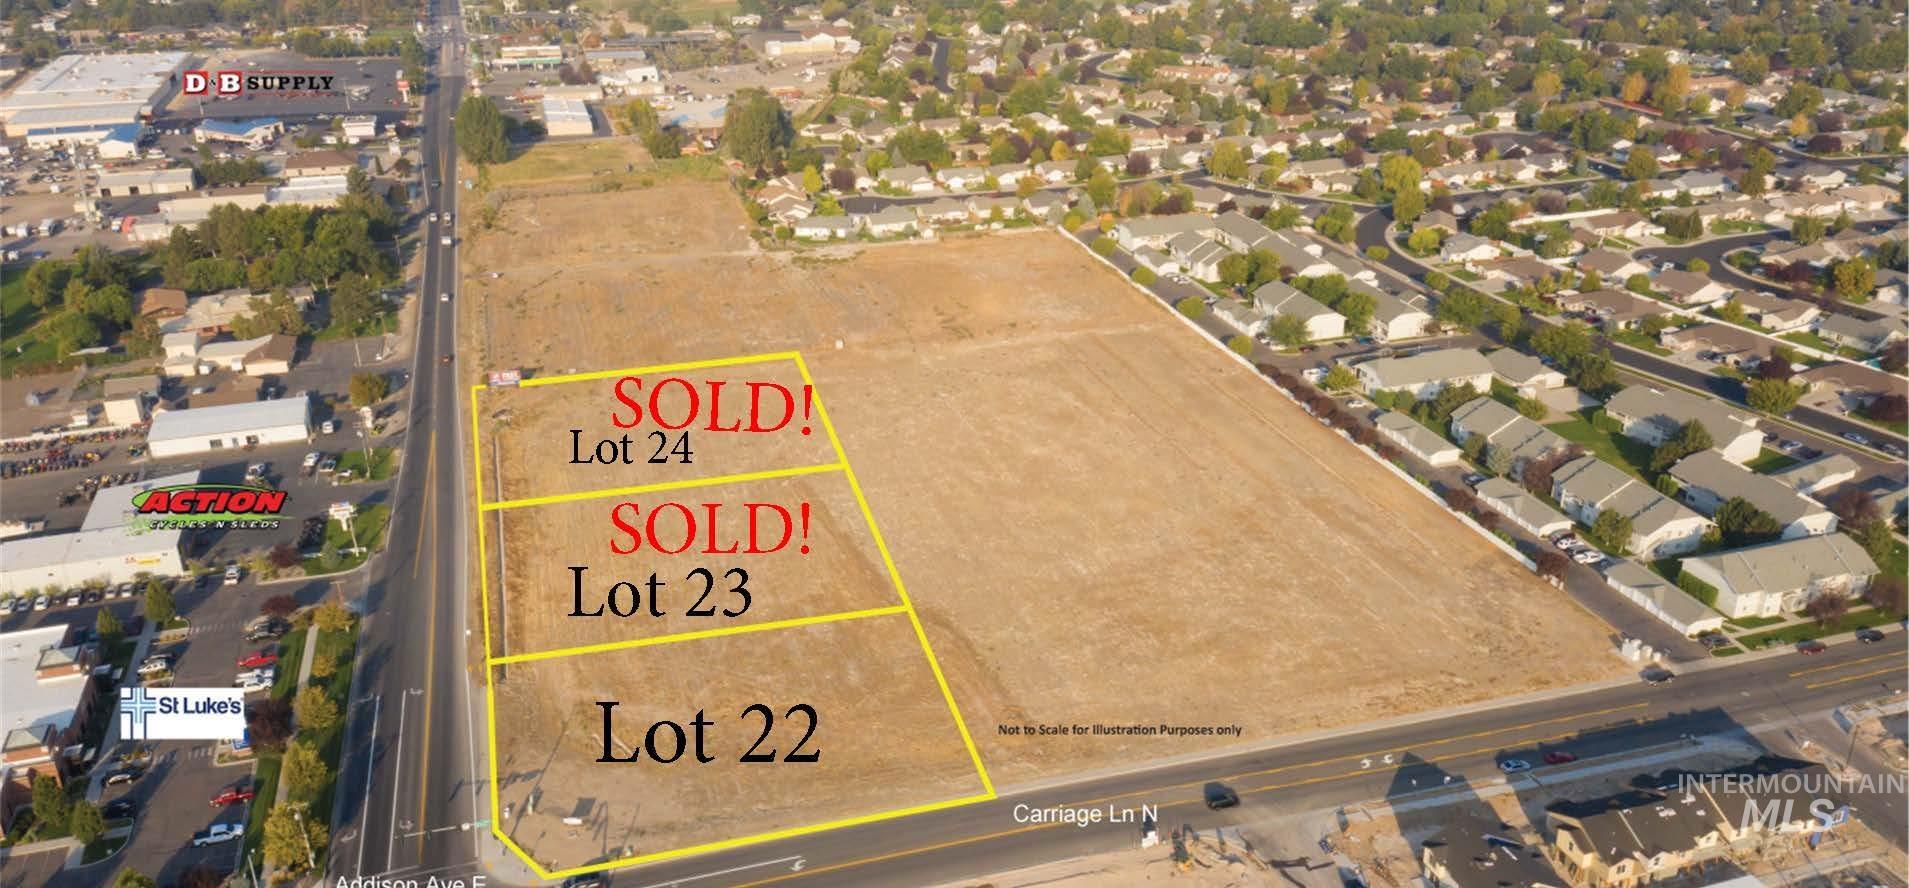 2469 Addison Ave E. Lot 12, Twin Falls, Idaho 83301, Business/Commercial For Sale, Price $652,316, 98862822